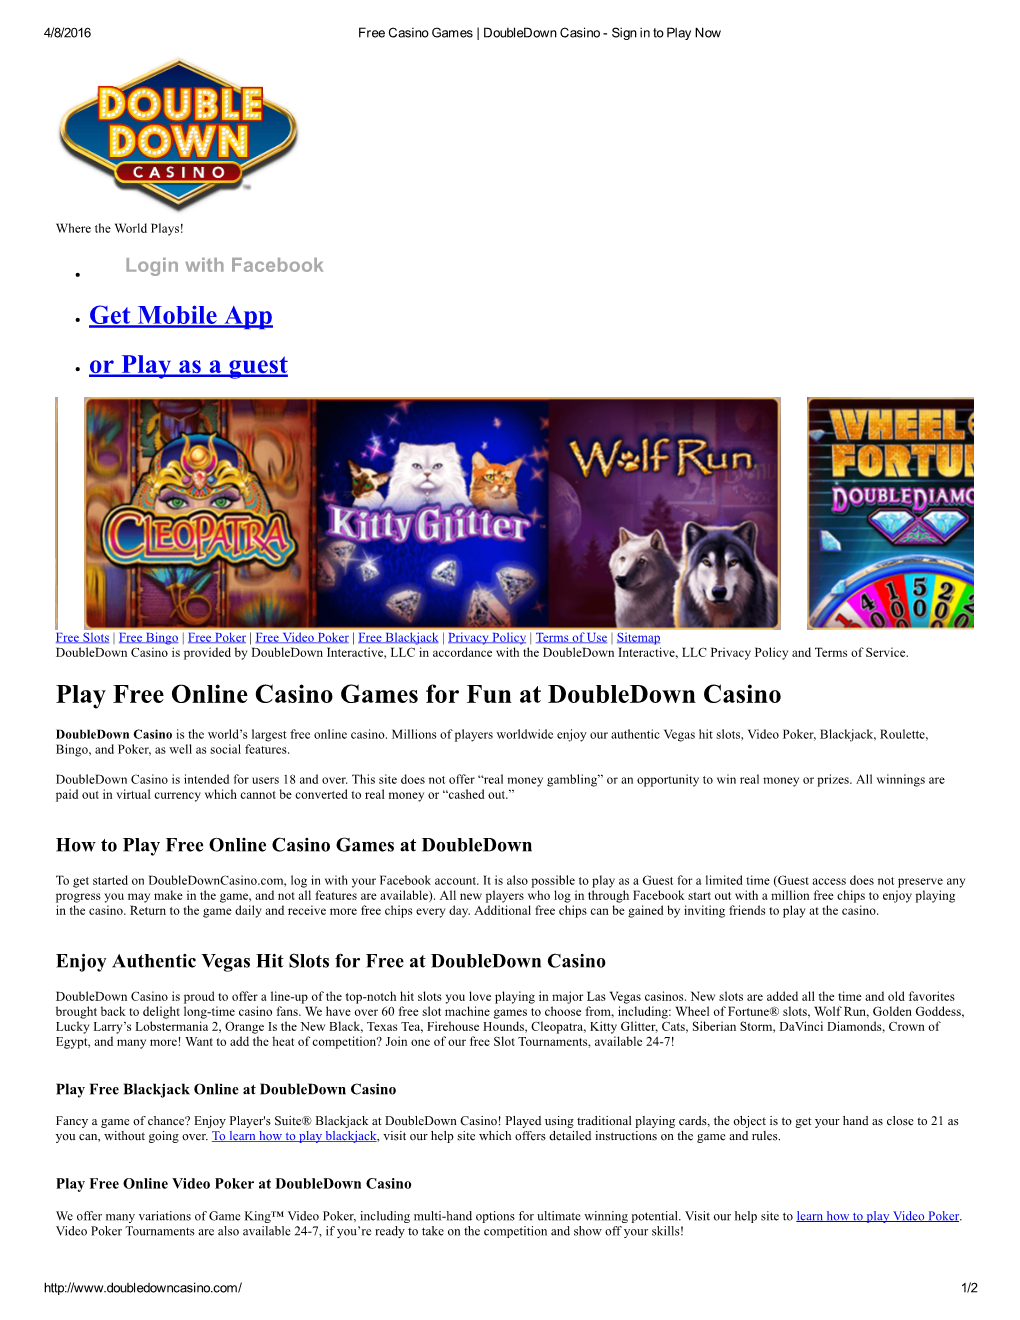 Get Mobile App Or Play As a Guest Play Free Online Casino Games For